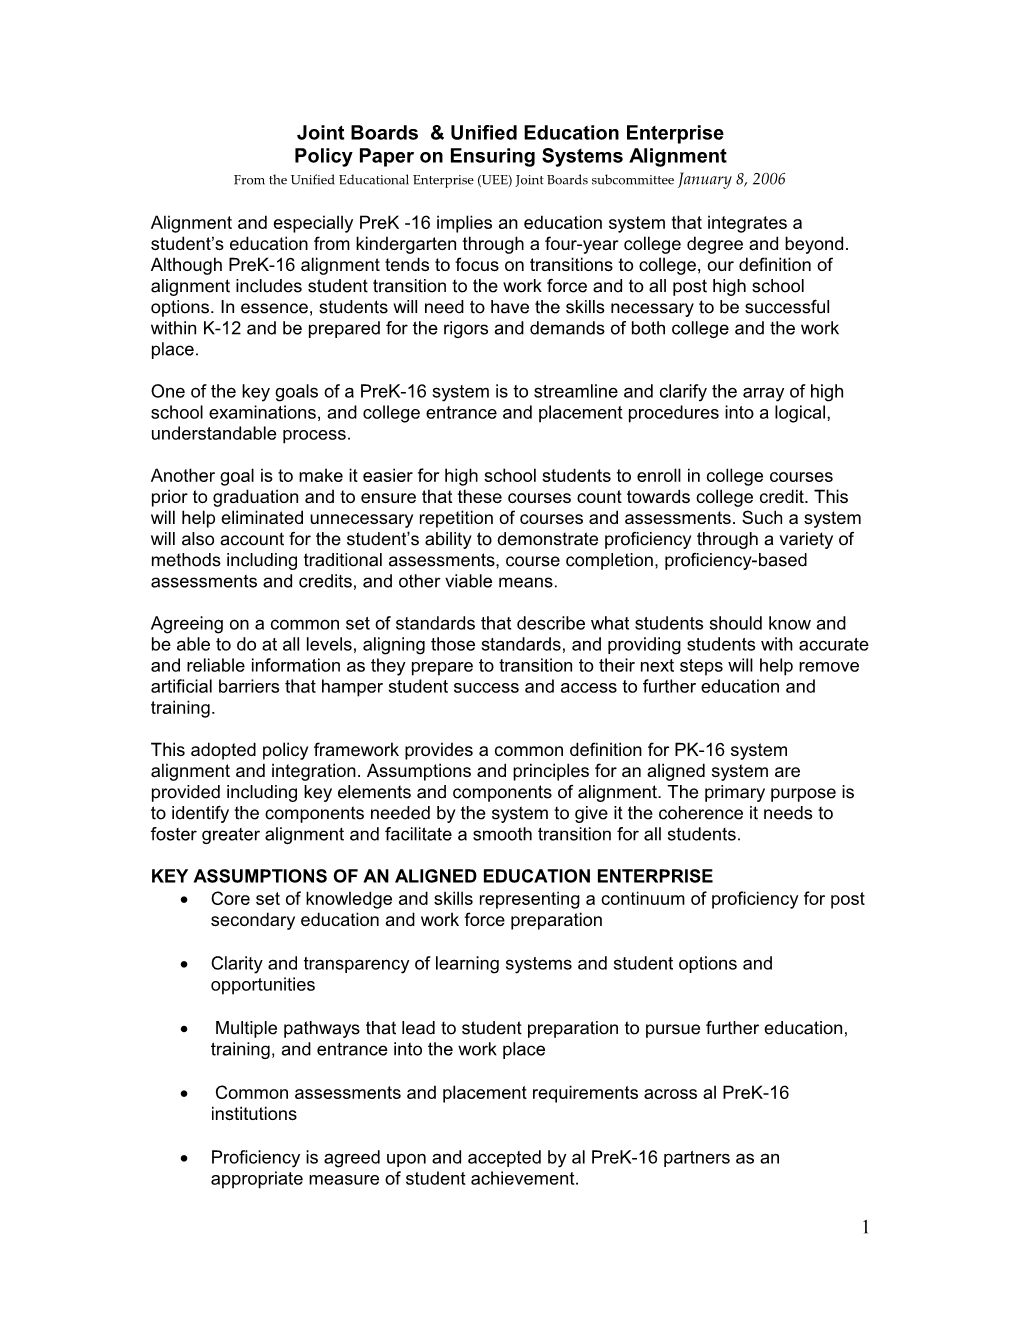 Policy Paper on Ensuring Systems Alignment